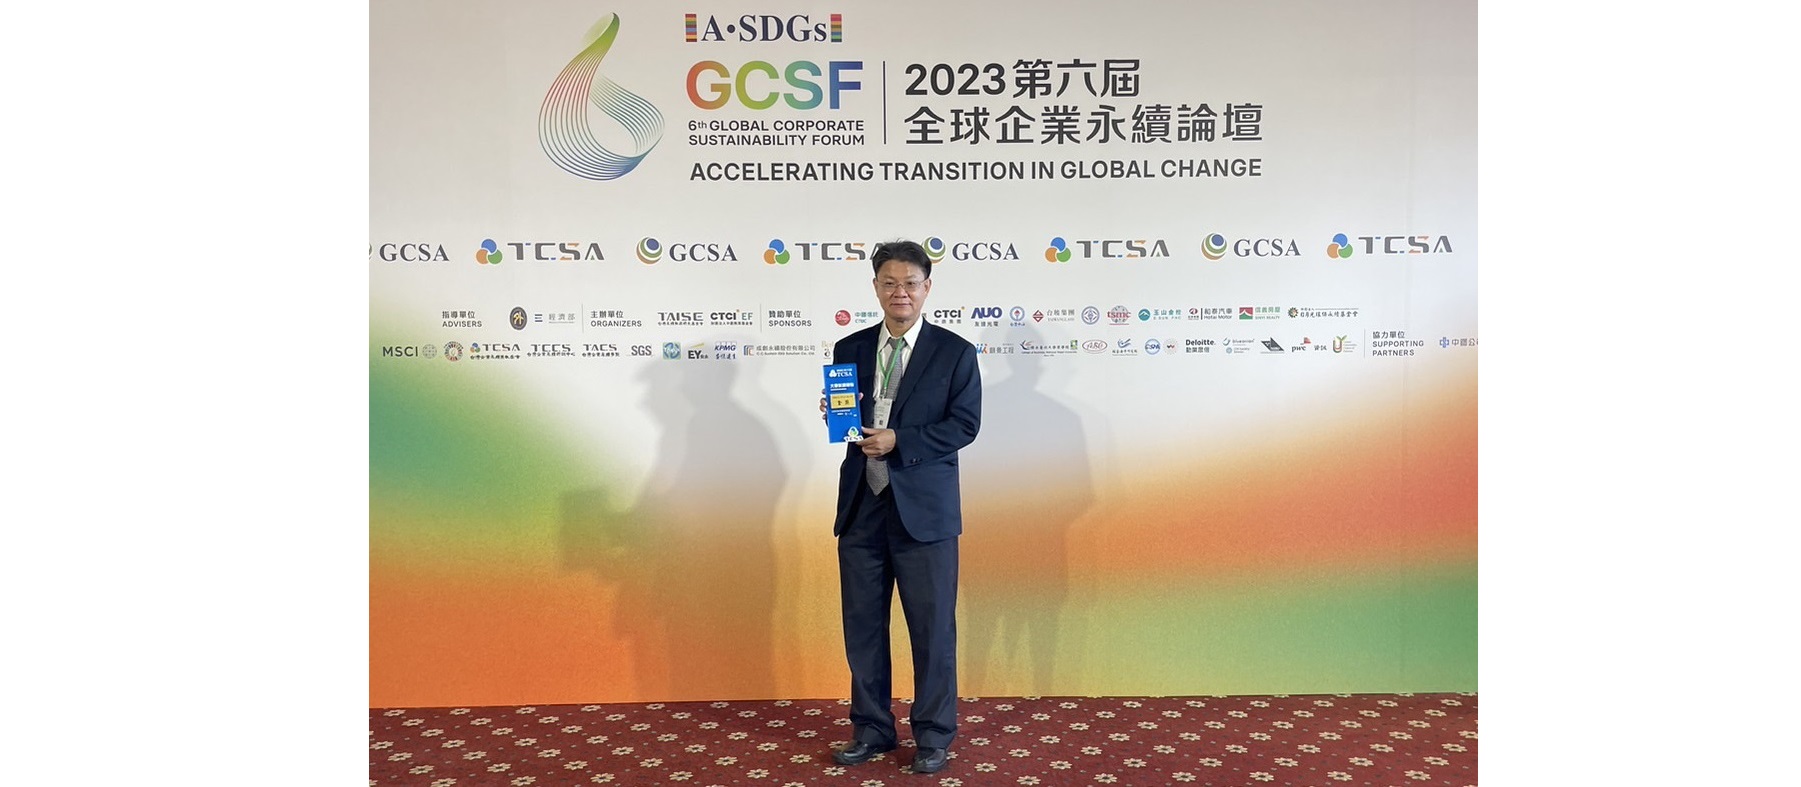 Announcement of the 2023 TCSA Taiwan Corporate Sustainability Awards Results – Ming Chuan University Awarded the "Gold Award for University Sustainability Reports"